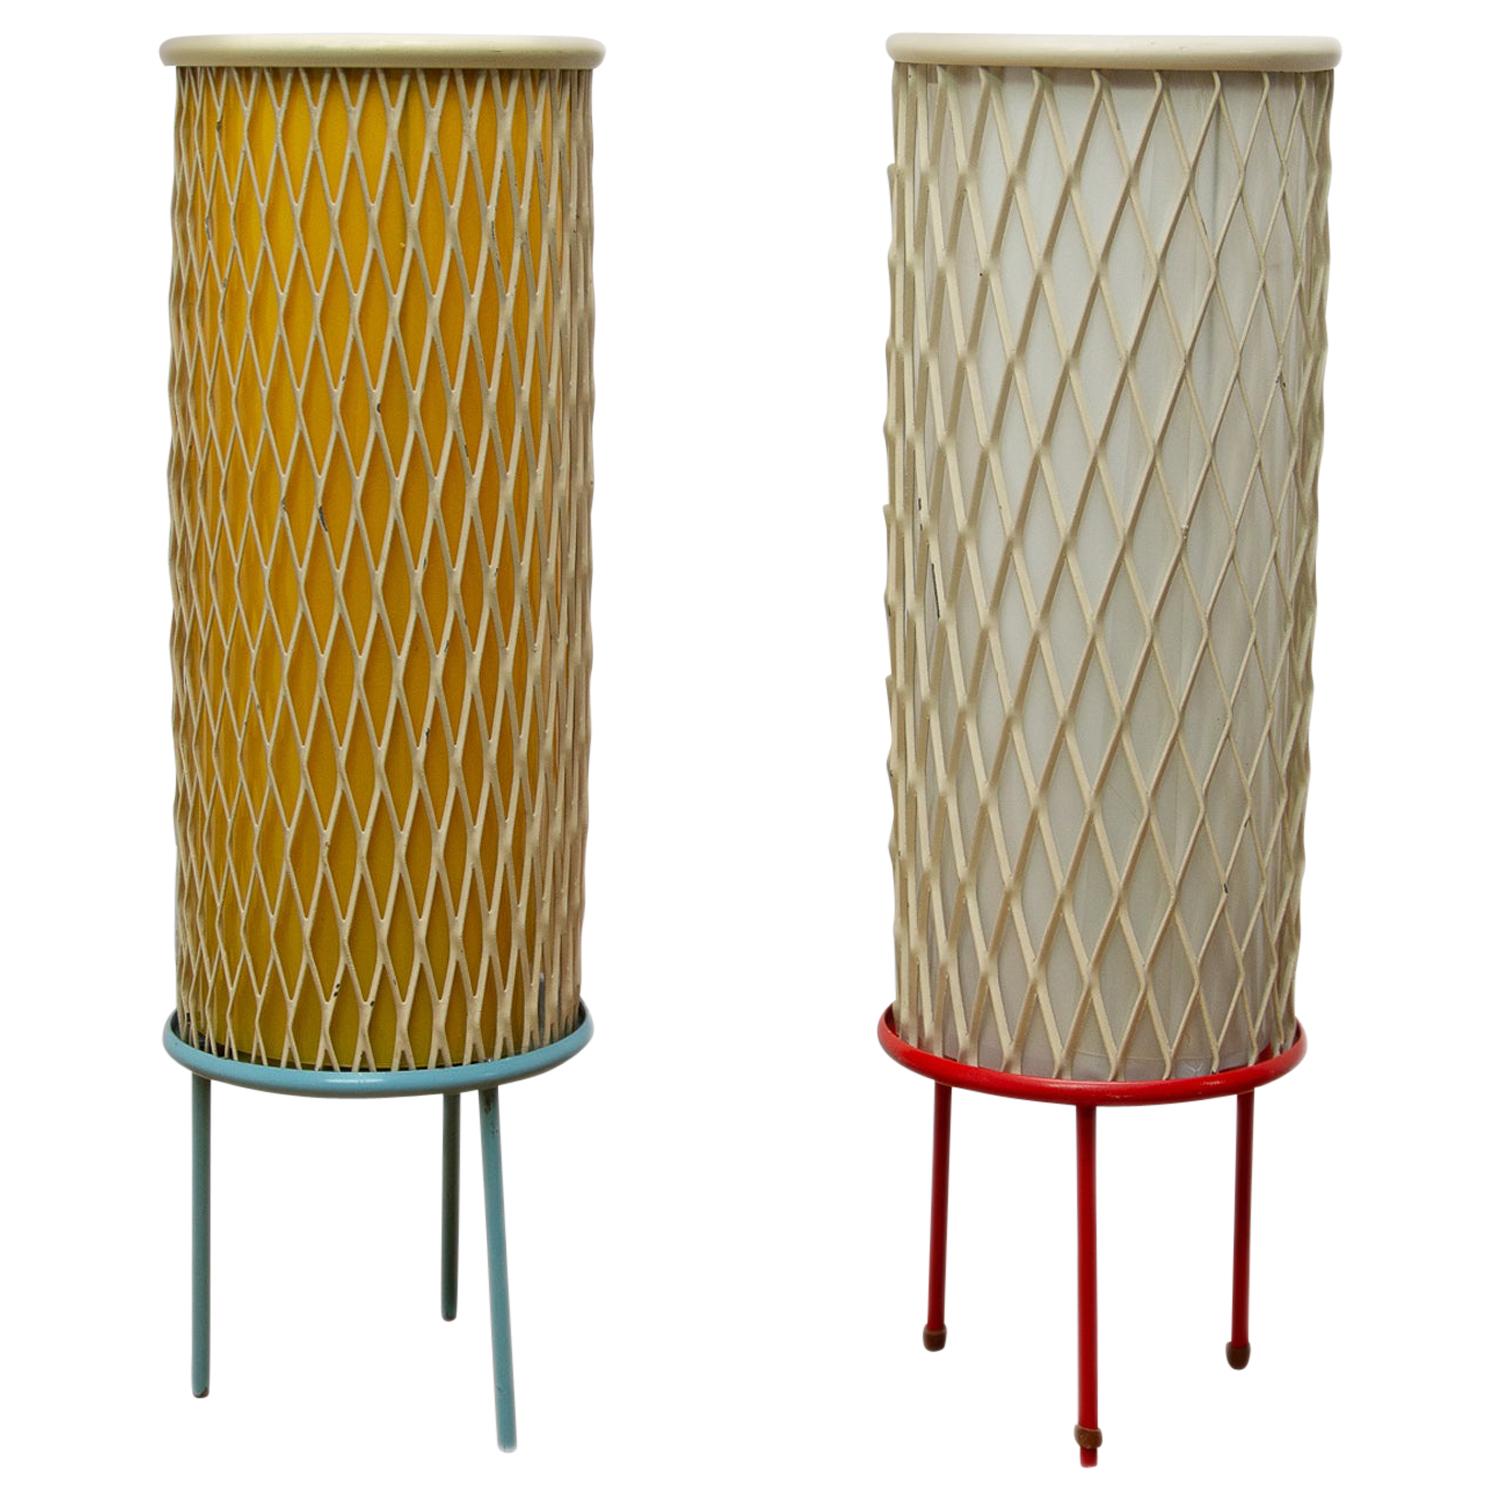 Pair of Midcentury Rocket Table Lamps by Josef Hůrka for Napako, 1960s, Czech